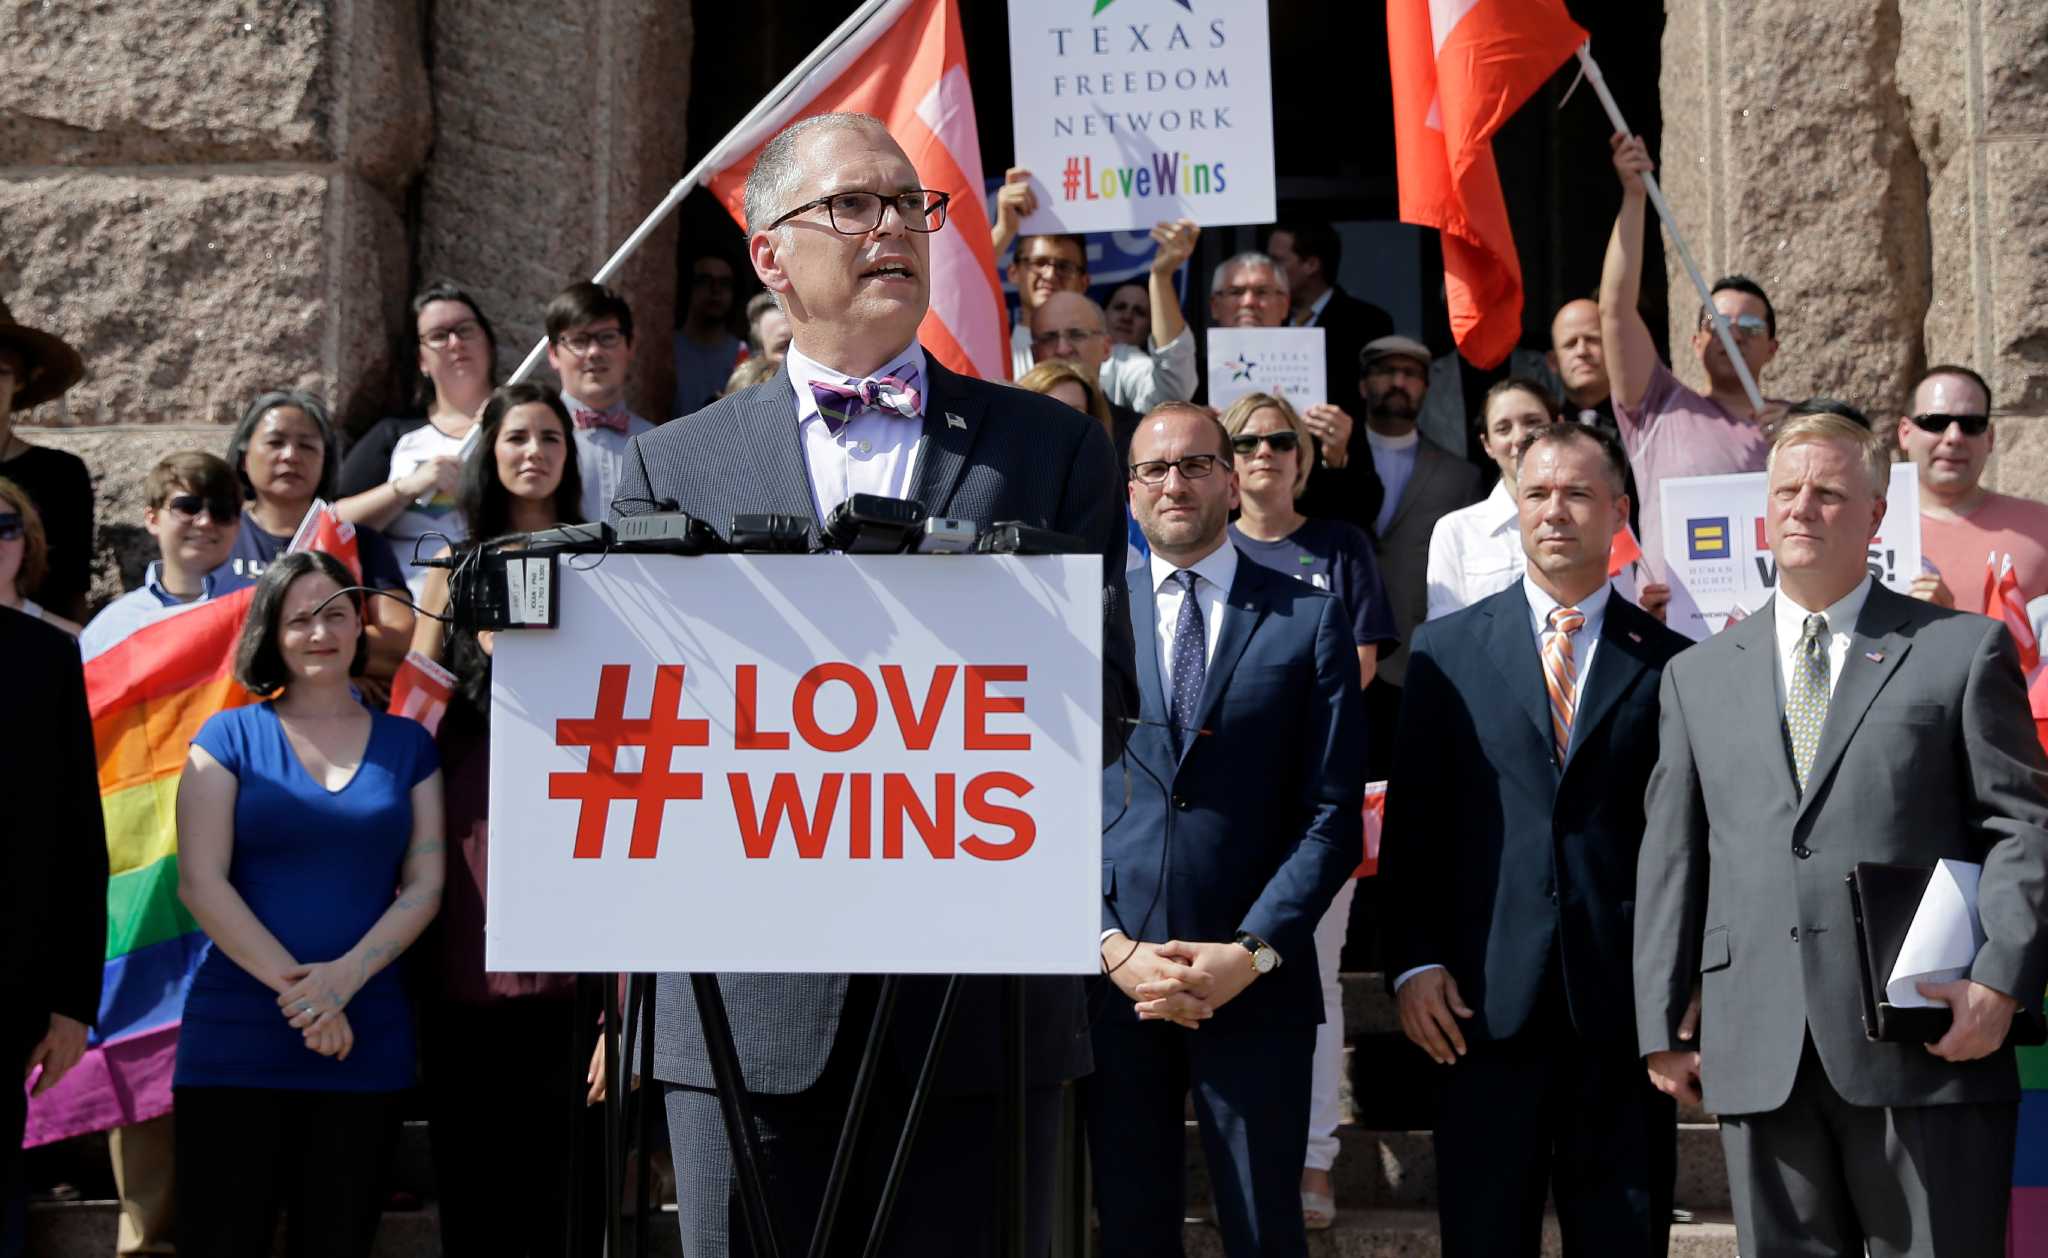 2015 Supreme Court case legalized same-sex marriage nationwide